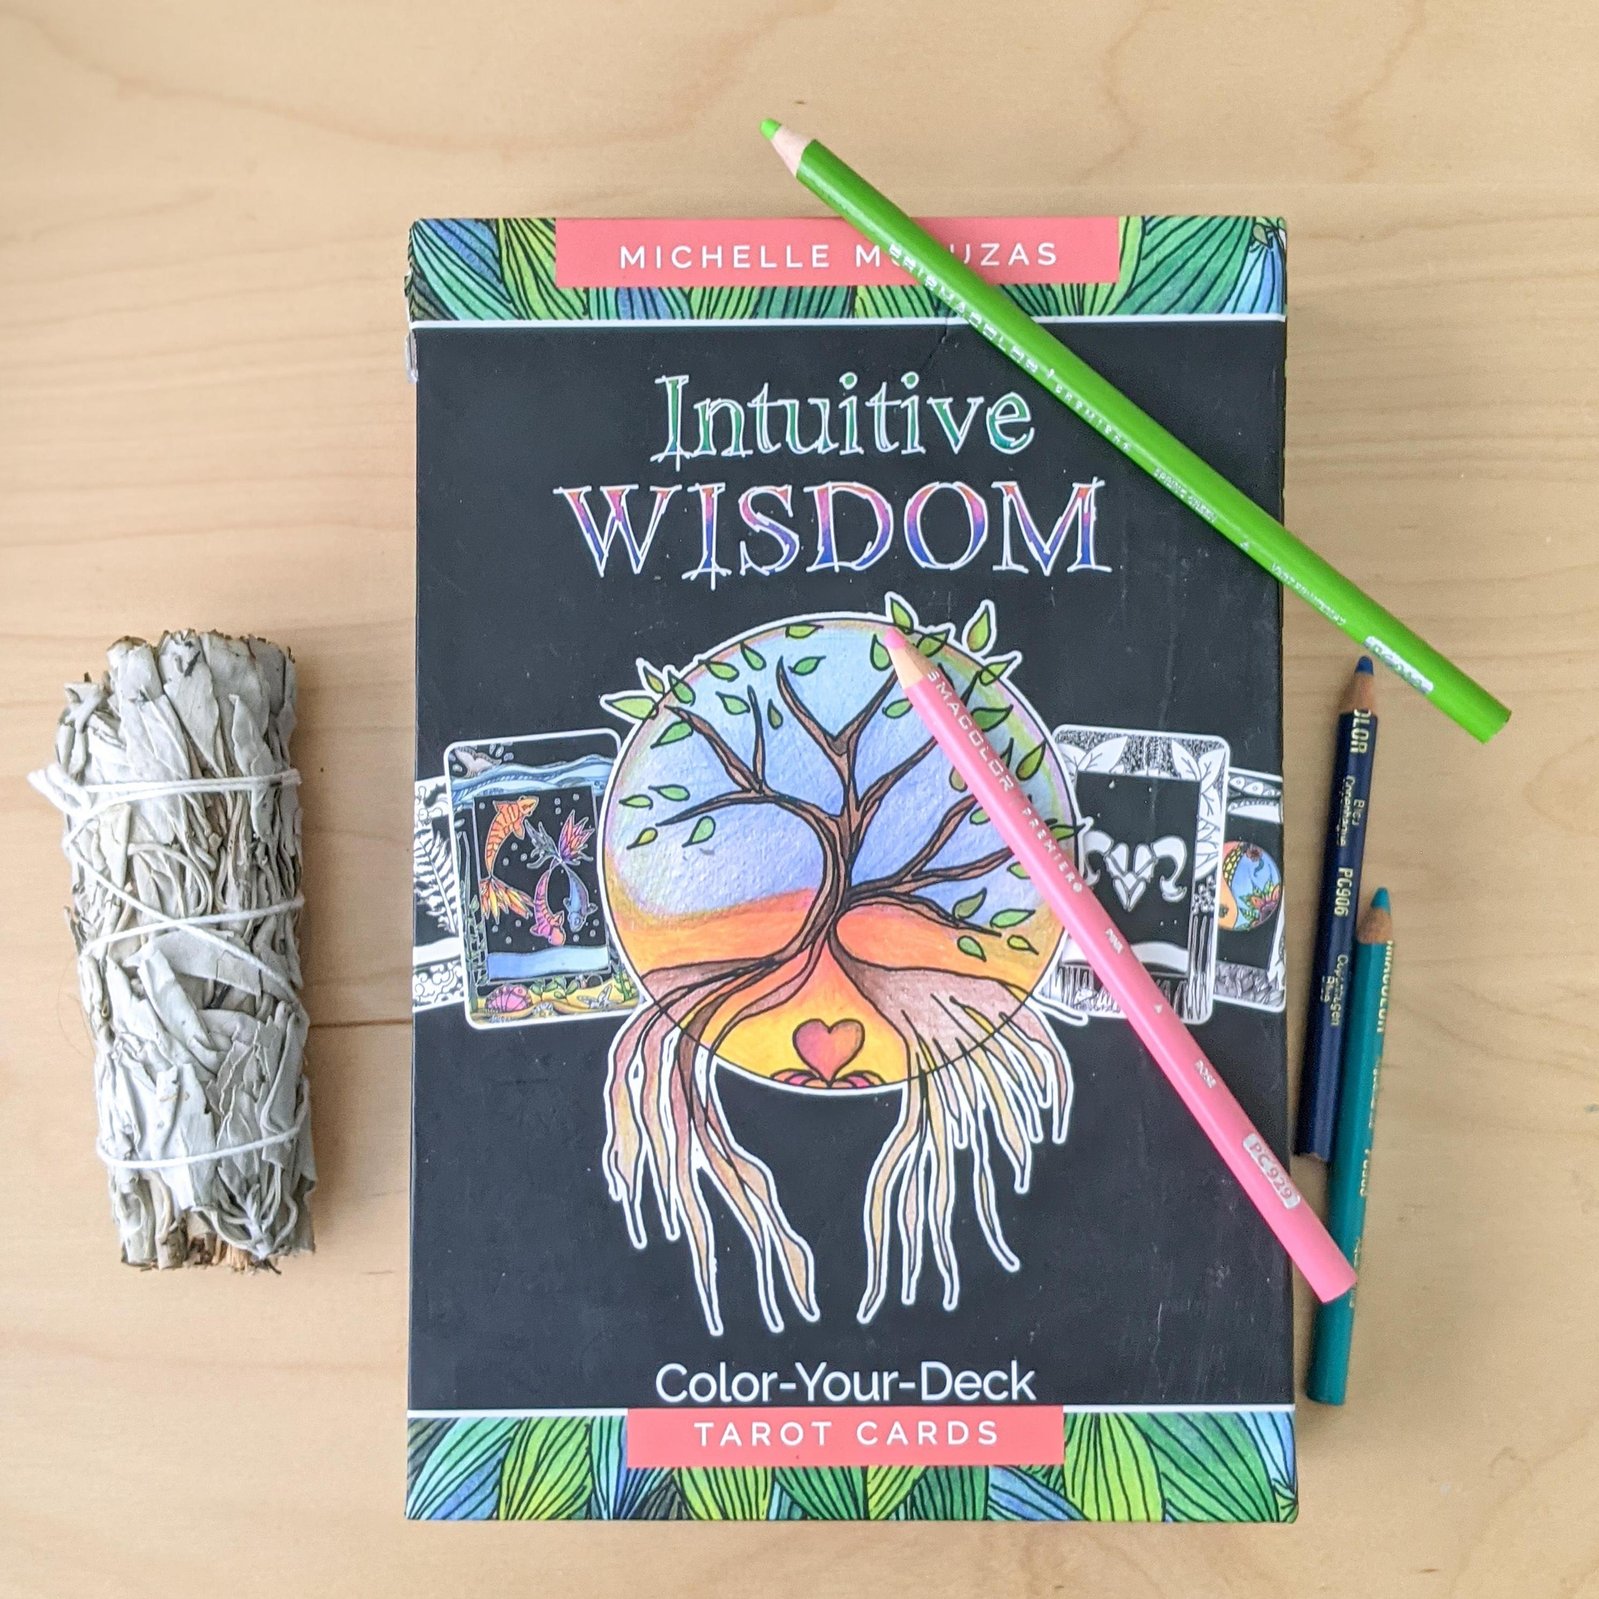 The Intuitive Wisdom Color Your own Tarot deck by Michelle Motuzas and published by Schiffer Books